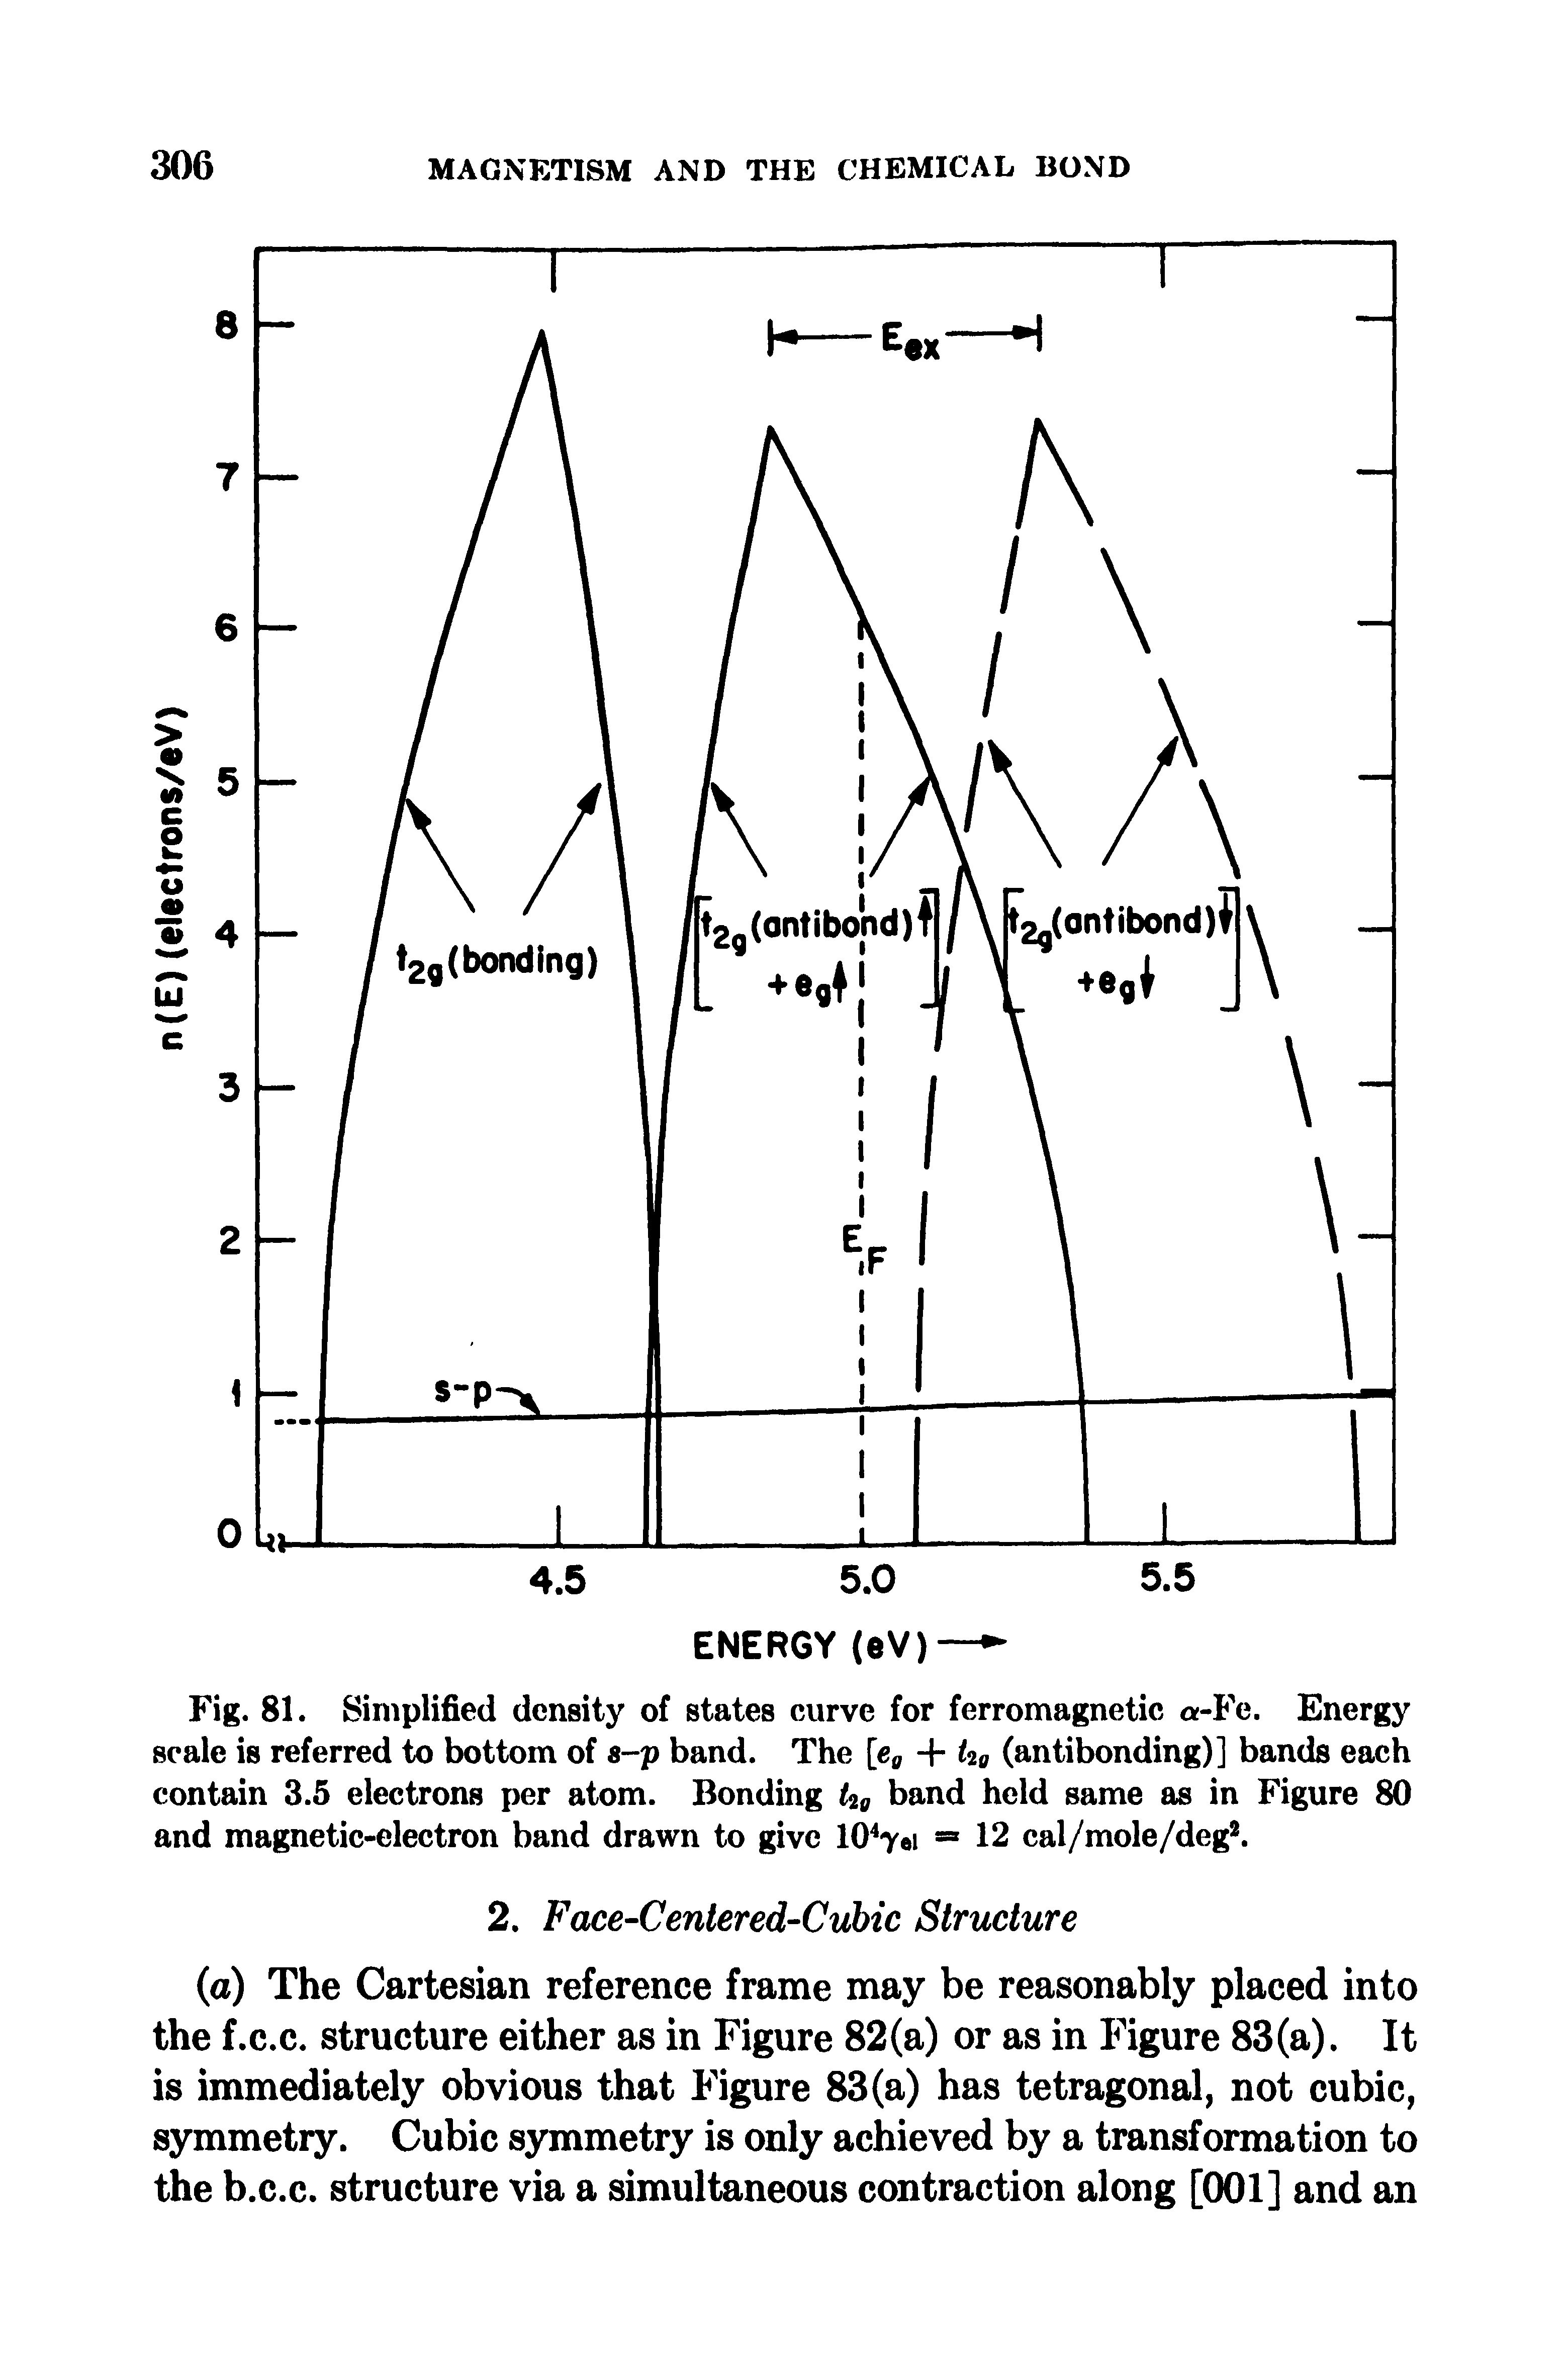 Fig. 81. Simplified density of states curve for ferromagnetic a-Fe. Energy scale is referred to bottom of 8-p band. The [eg -f t2g (antibonding)] bands each contain 3.5 electrons per atom. Bonding t2g band held same as in Figure 80 and magnetic-electron band drawn to give 104yei = 12 cal/mole/deg2.